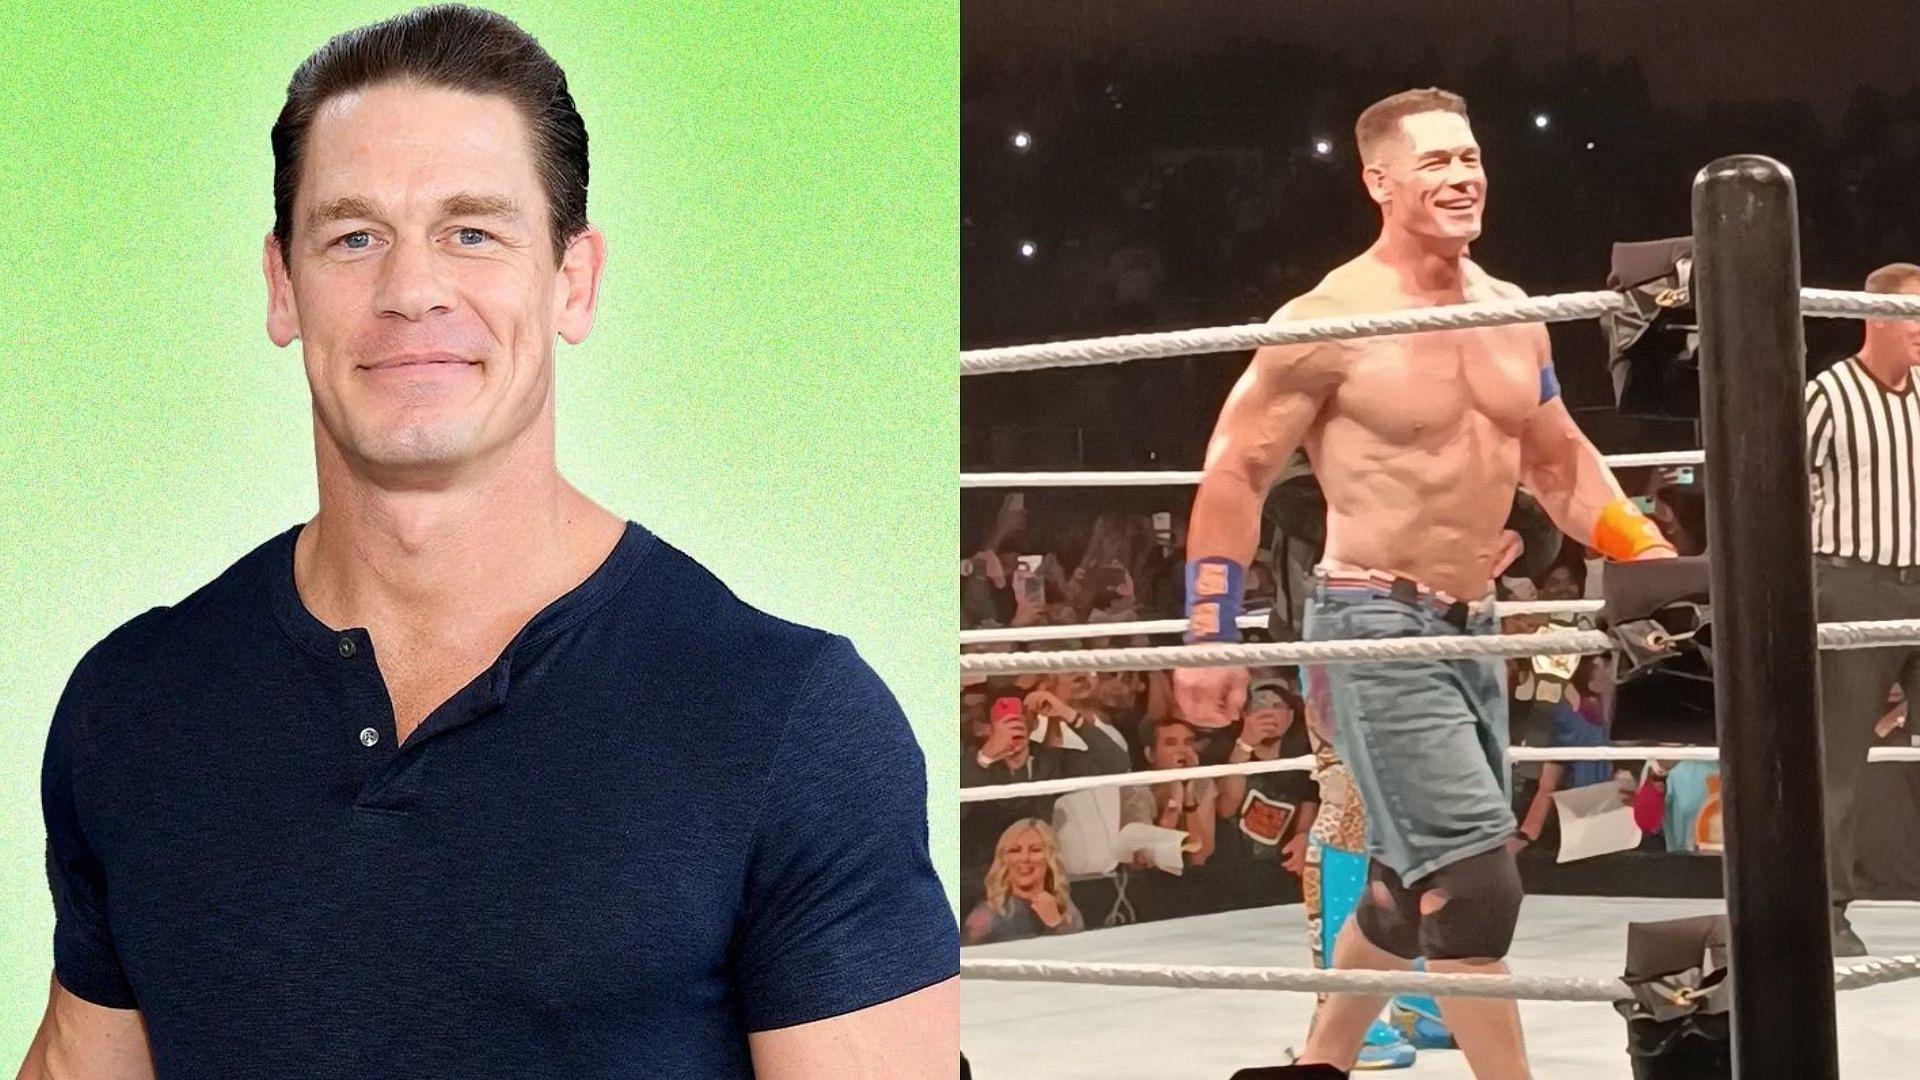 Cena competed at Superstar Spectacle today.